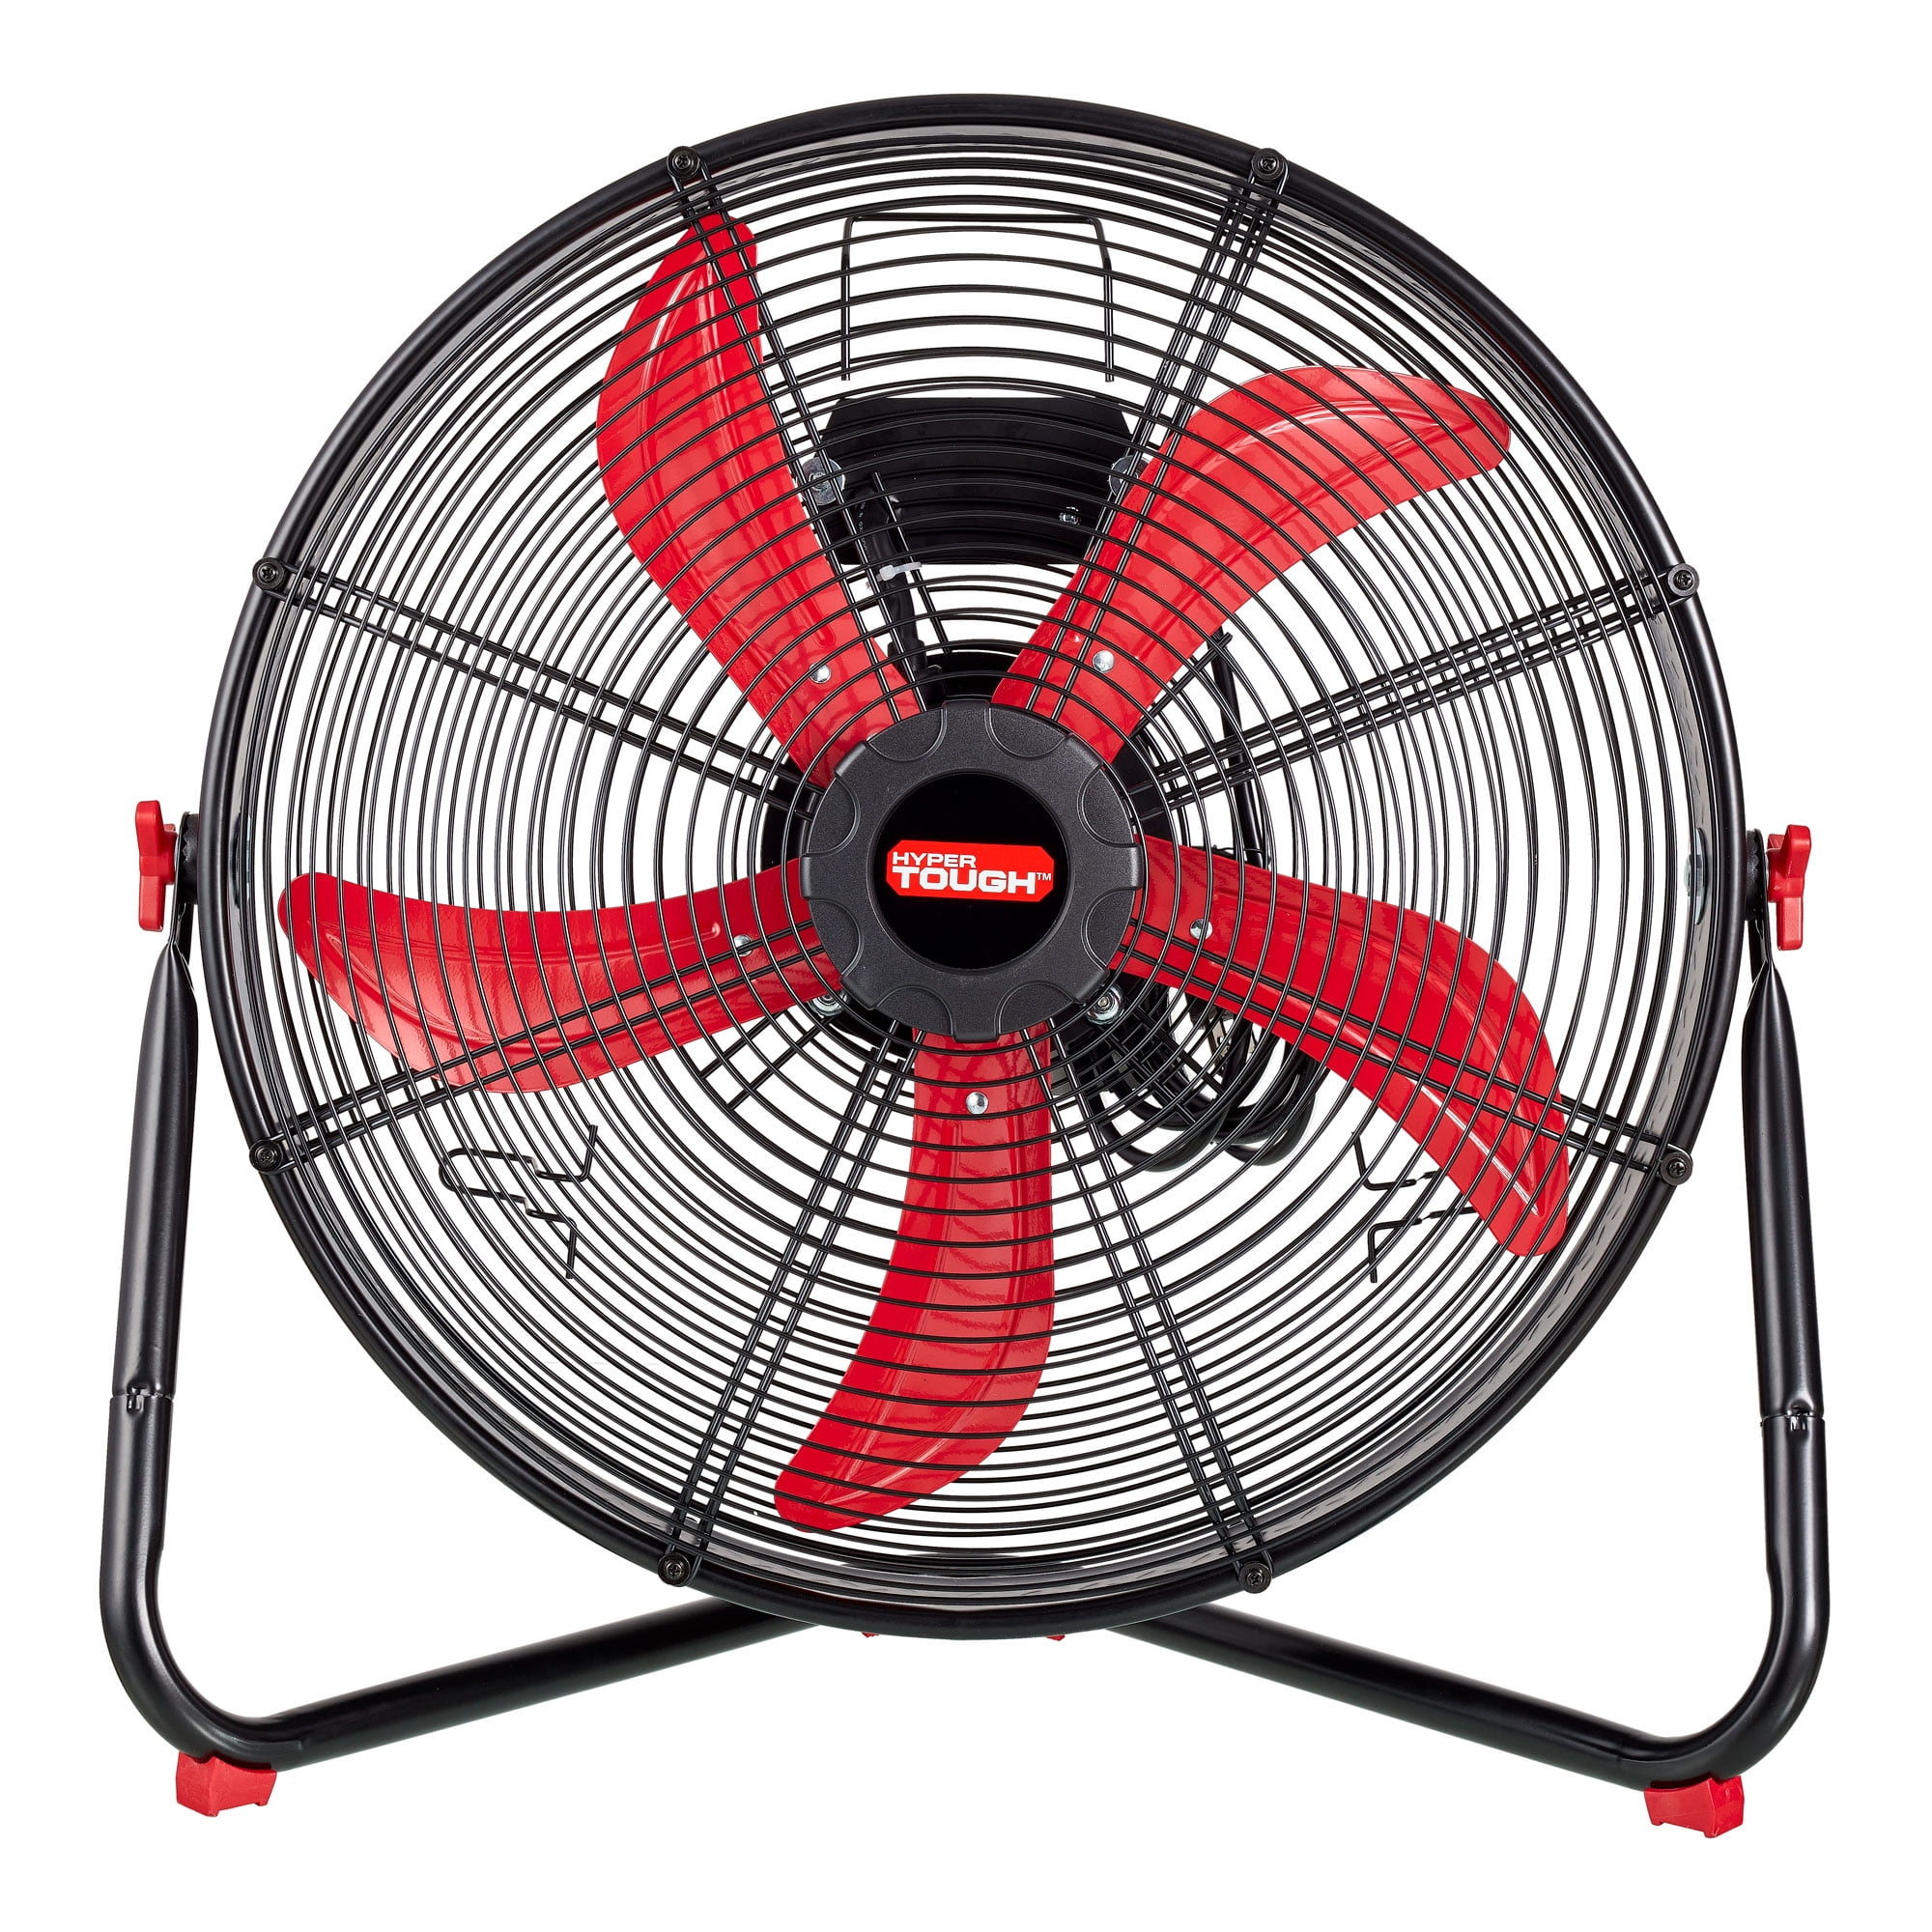 Hyper Tough 1 HP 3-Speed Utility Fan, Air Mover, Floor Carpet Dryer with  25Ft Powercord, Black